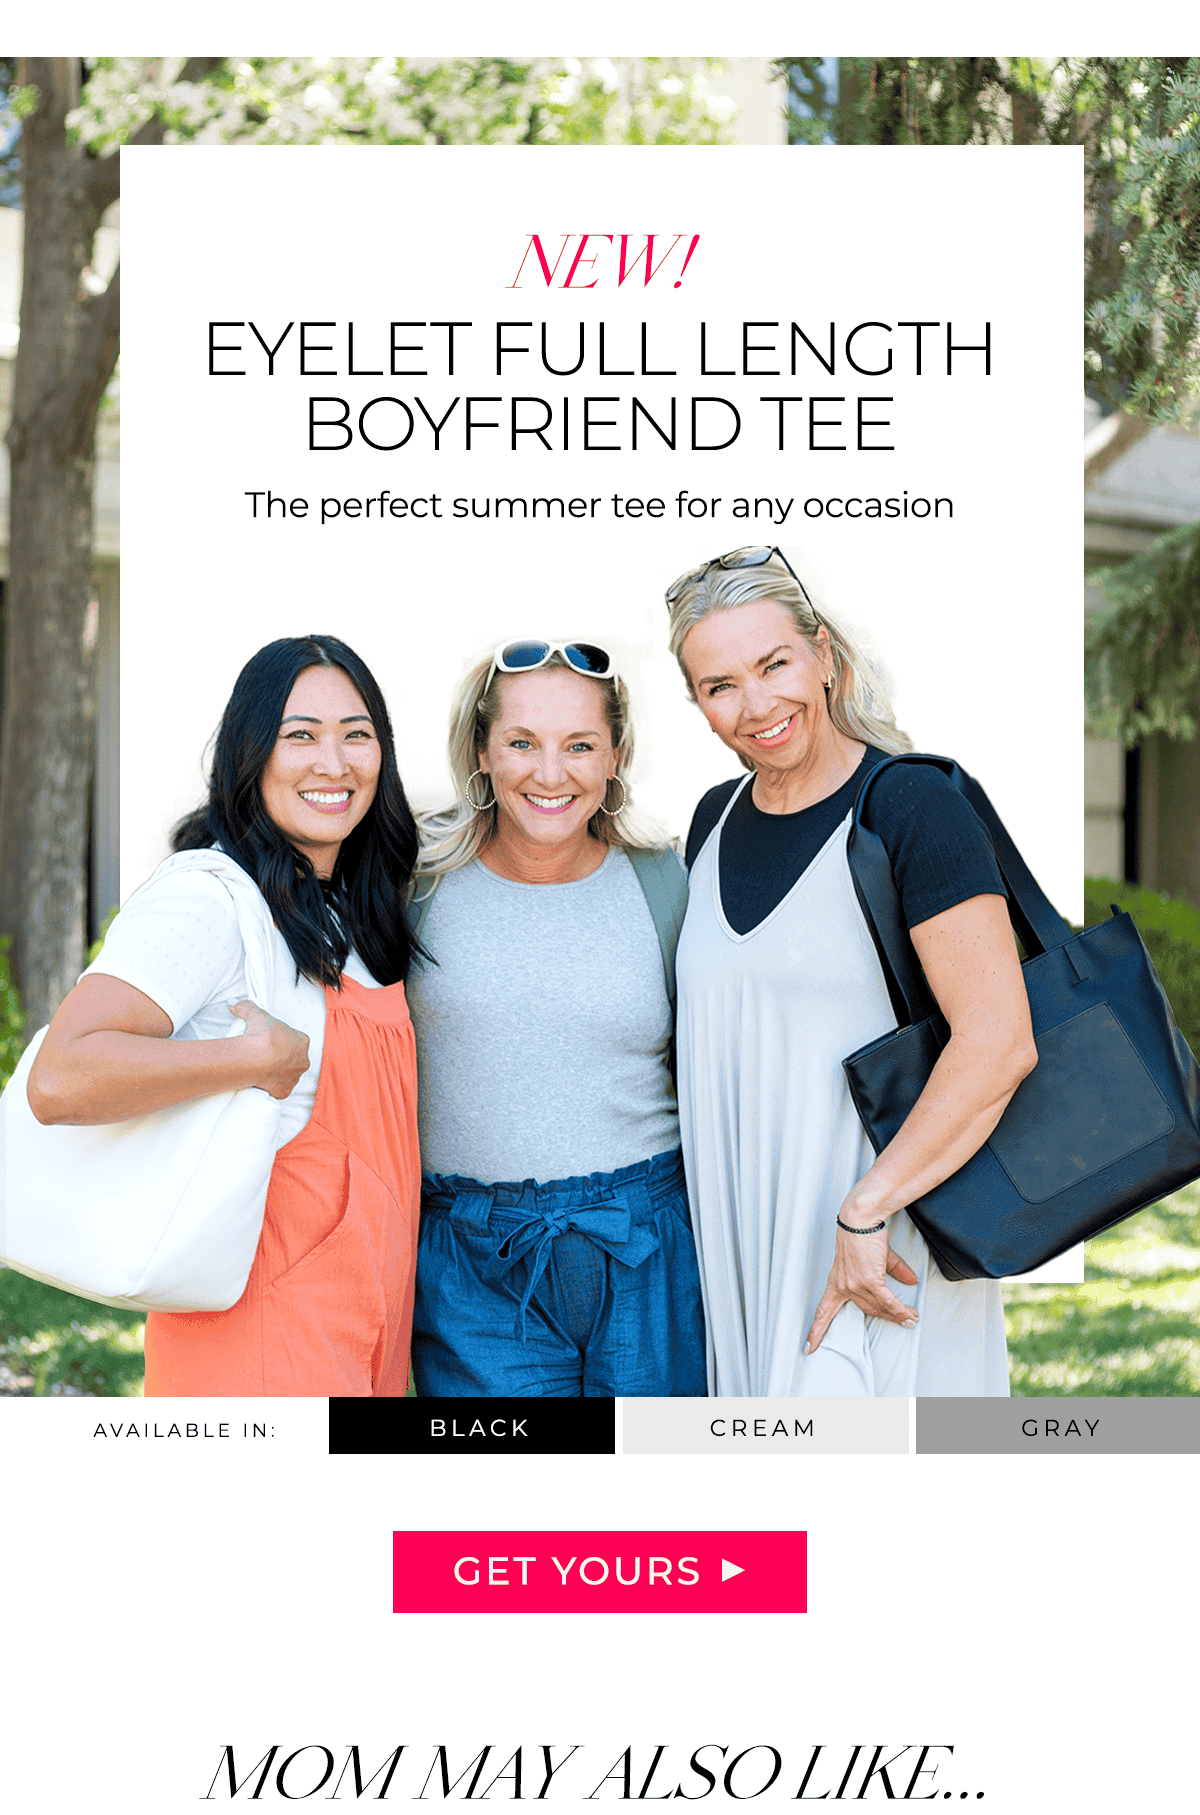 NEW! Eyelet Full Length Boyfriend The perfect summer tee for any occasion Available in Black Cream Grey